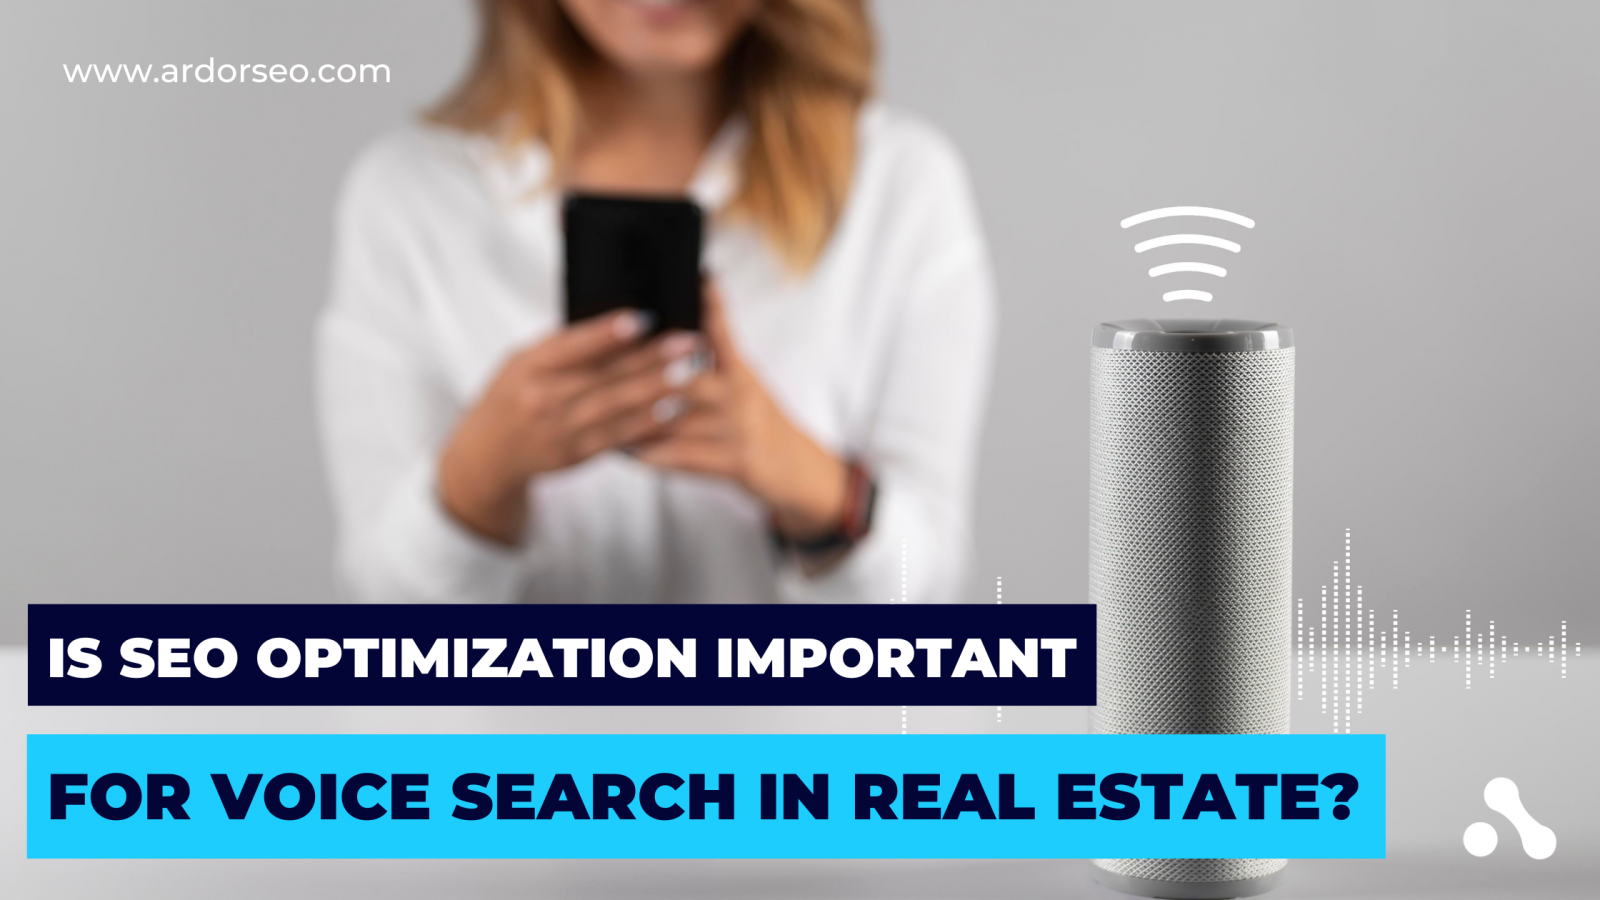 Voice searching on smart speakers